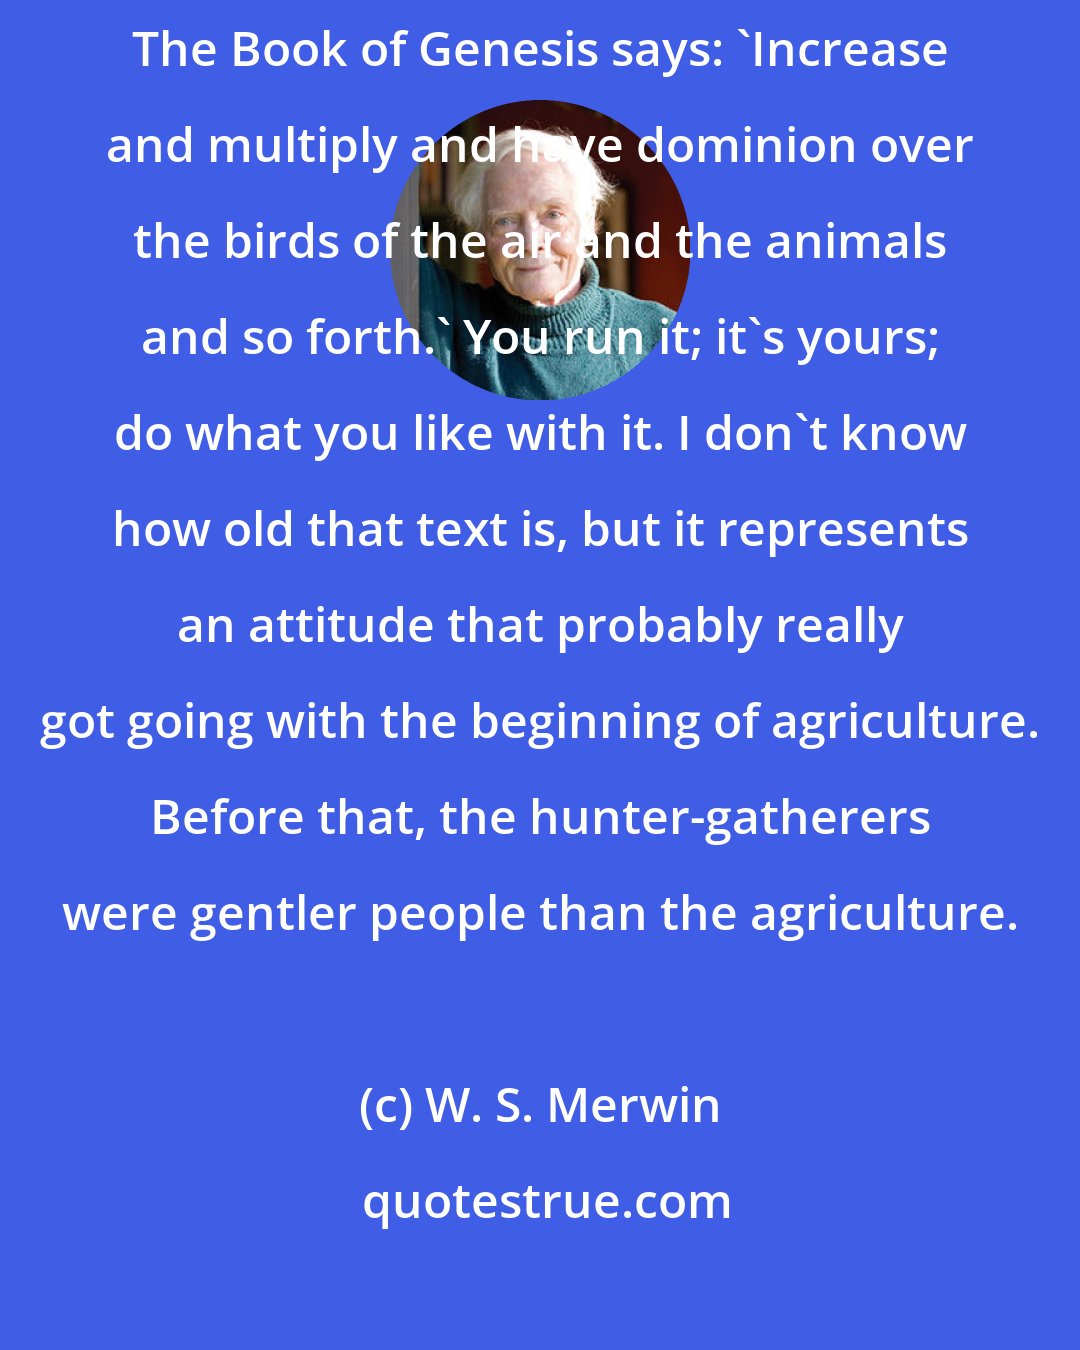 W. S. Merwin: It's an attitude of superiority. We are superior to the rest of life. The Book of Genesis says: 'Increase and multiply and have dominion over the birds of the air and the animals and so forth.' You run it; it's yours; do what you like with it. I don't know how old that text is, but it represents an attitude that probably really got going with the beginning of agriculture. Before that, the hunter-gatherers were gentler people than the agriculture.